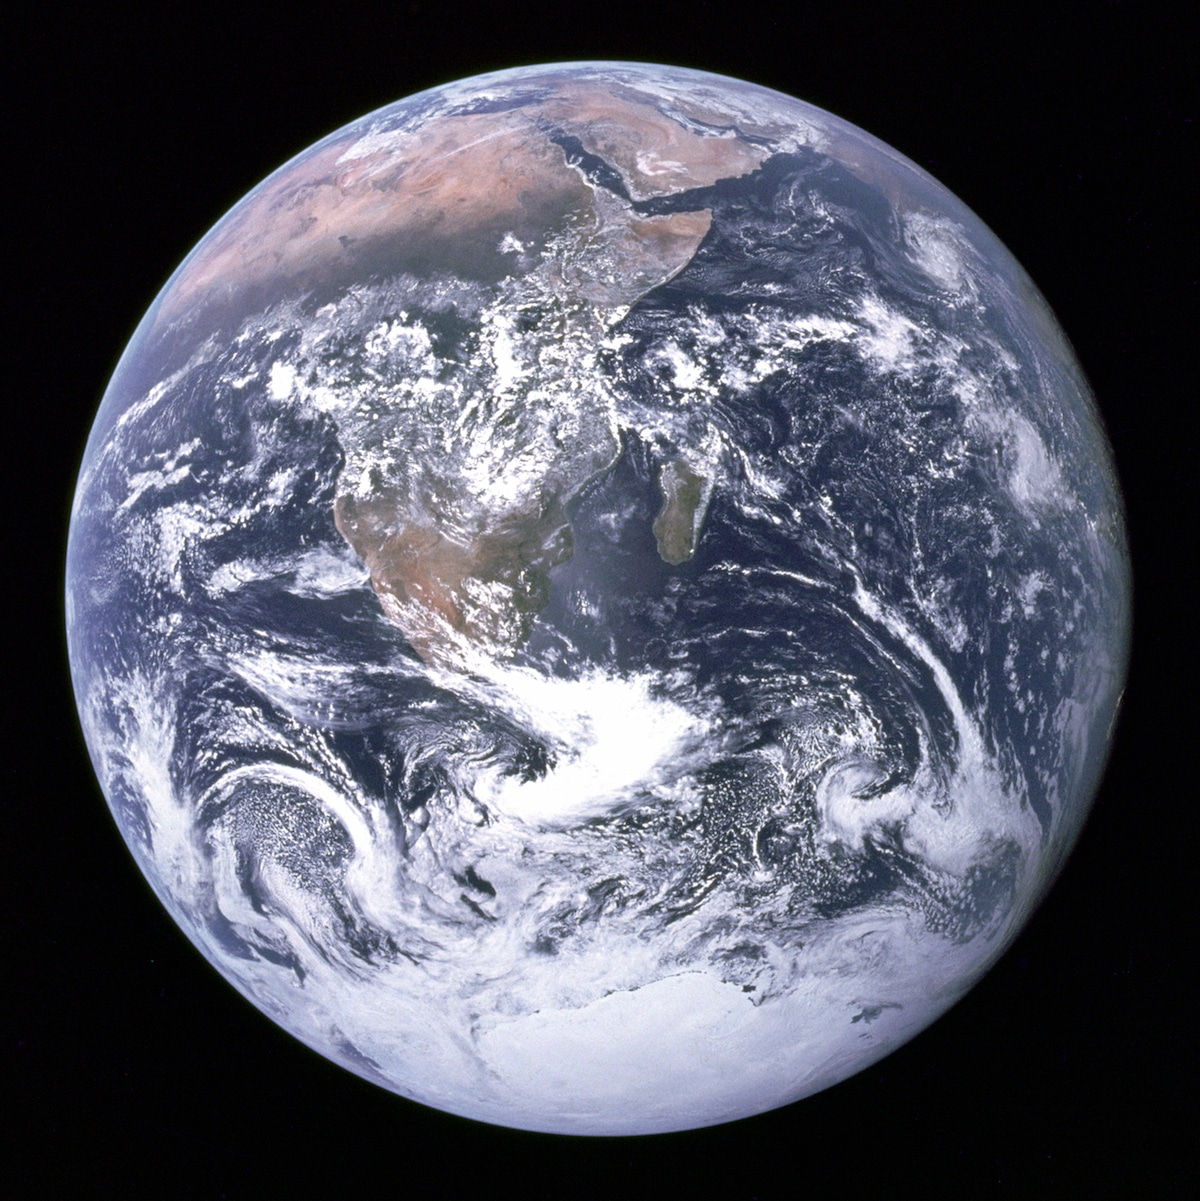 "The Blue Marble" captured by Apollo 17 crew